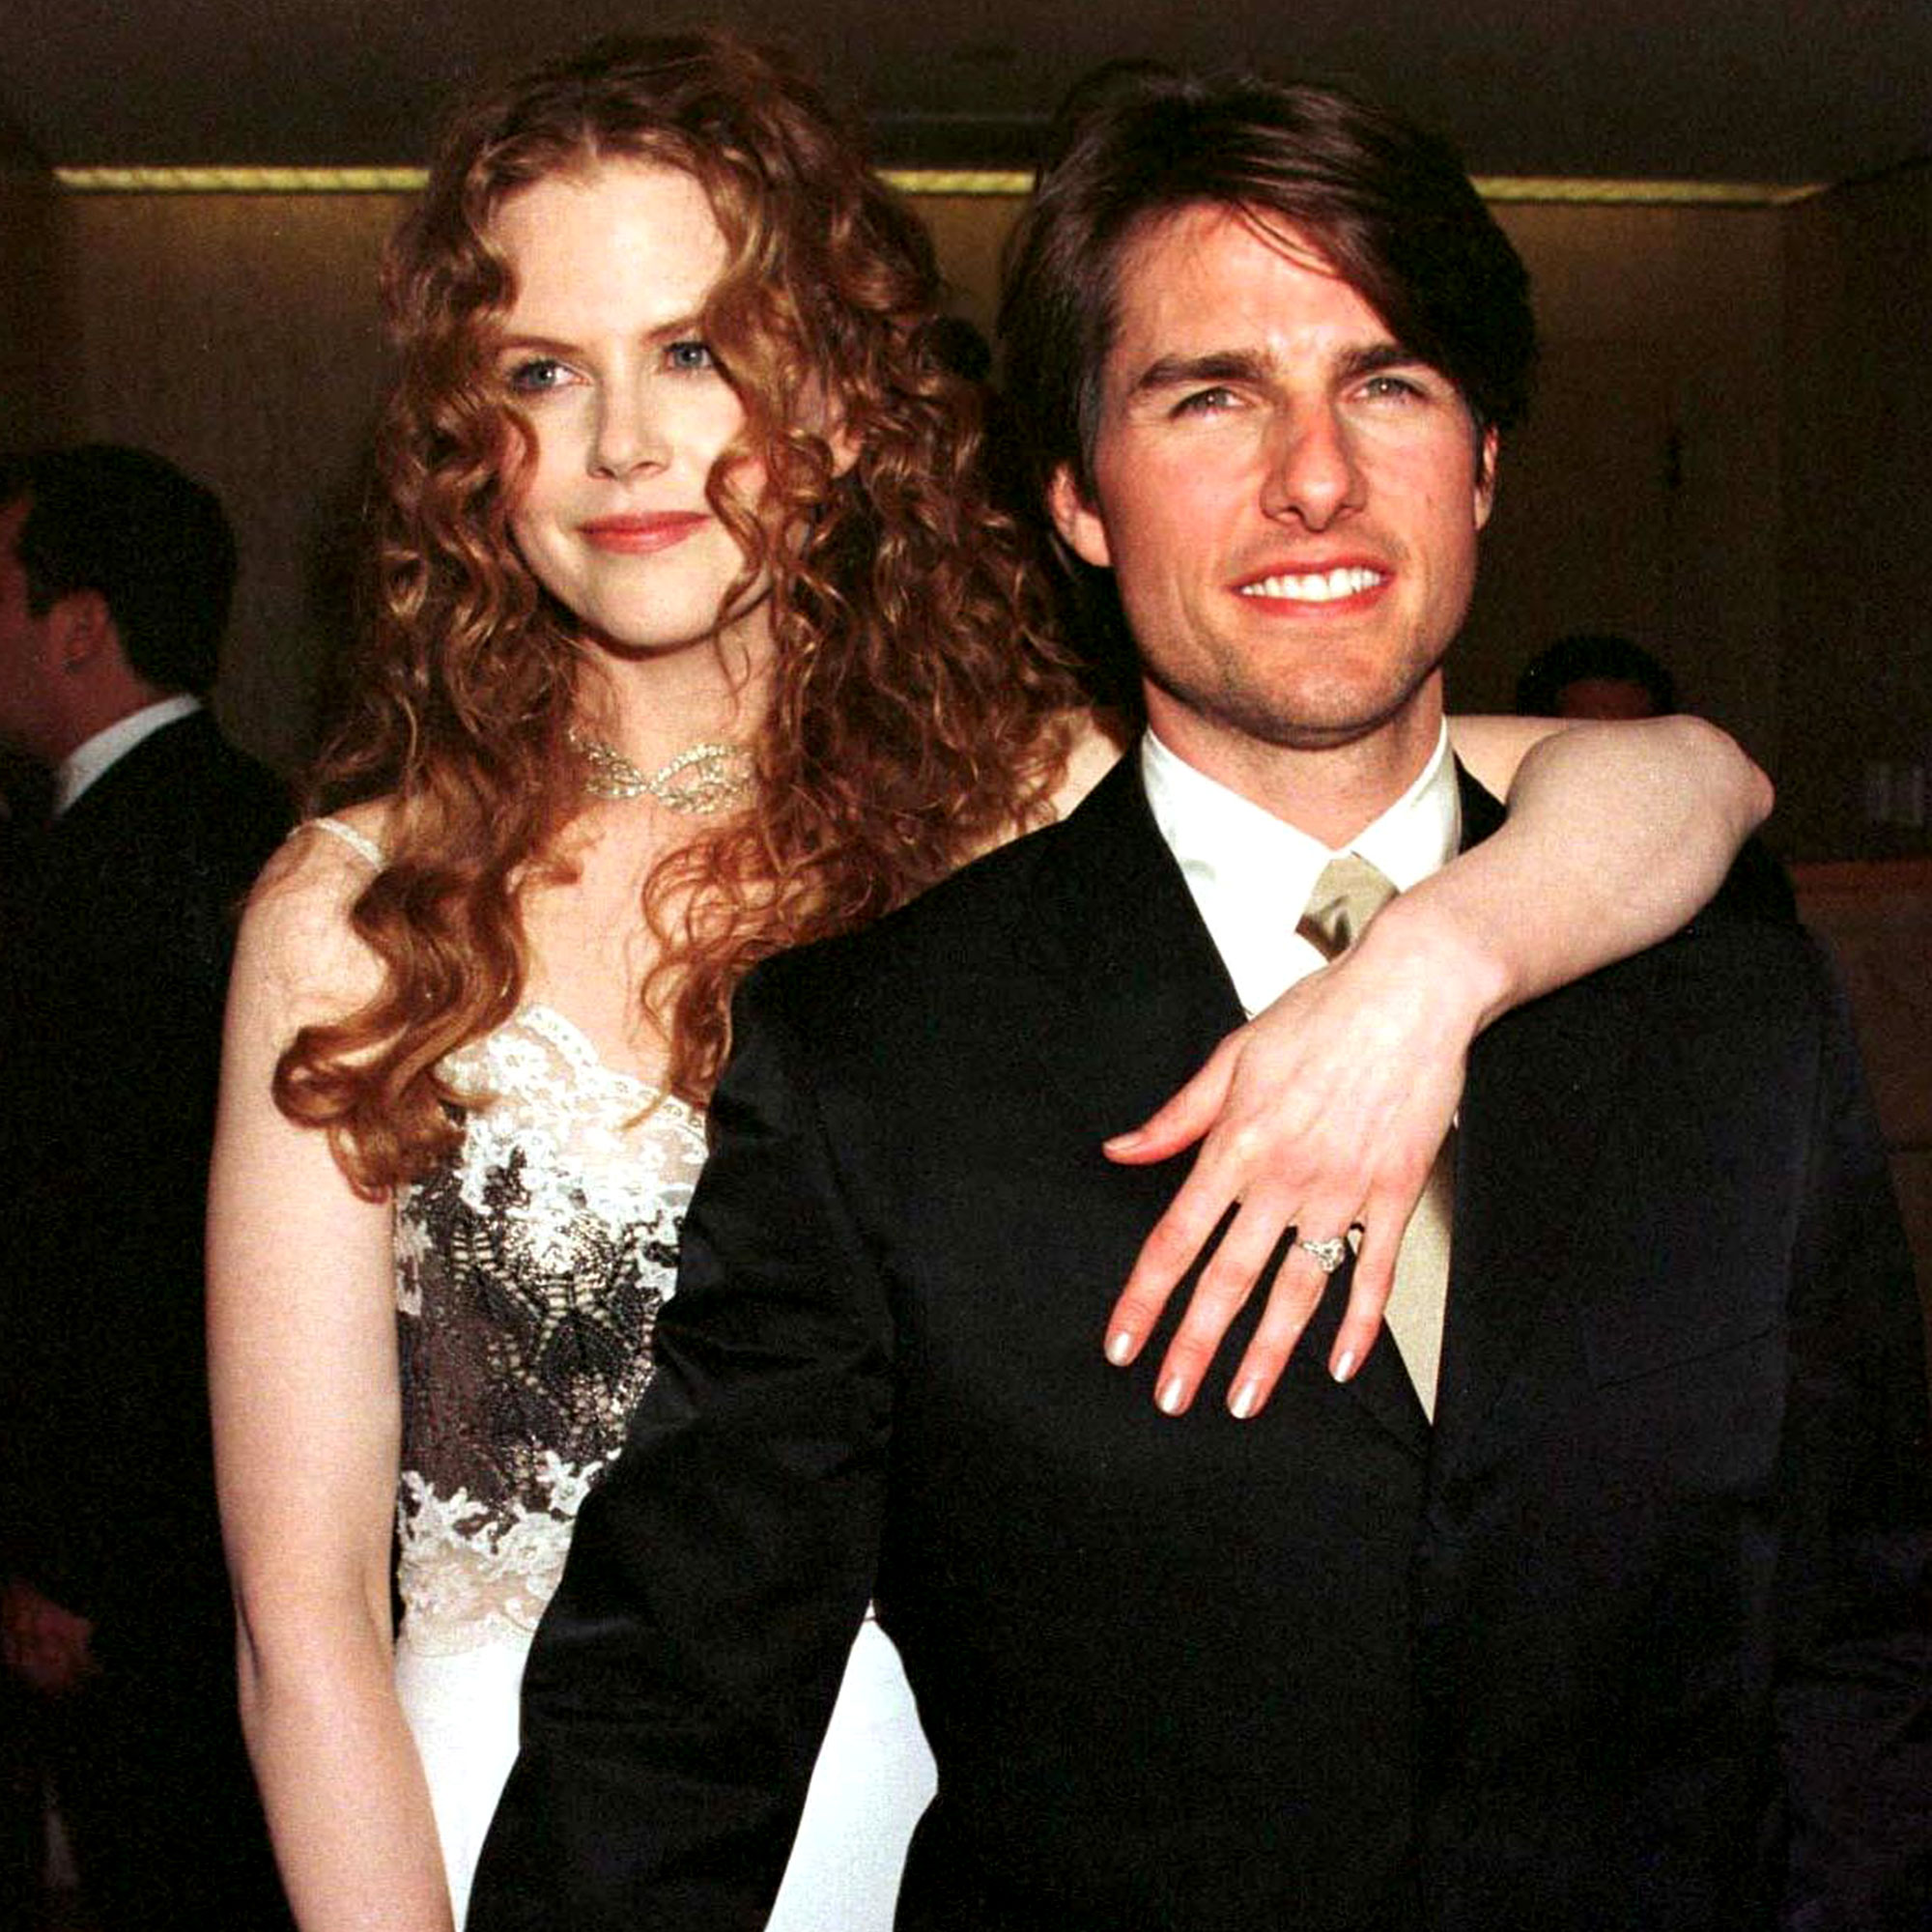 Scientology Played Key Role in Tom Cruise, Nicole Kidman Divorce pic